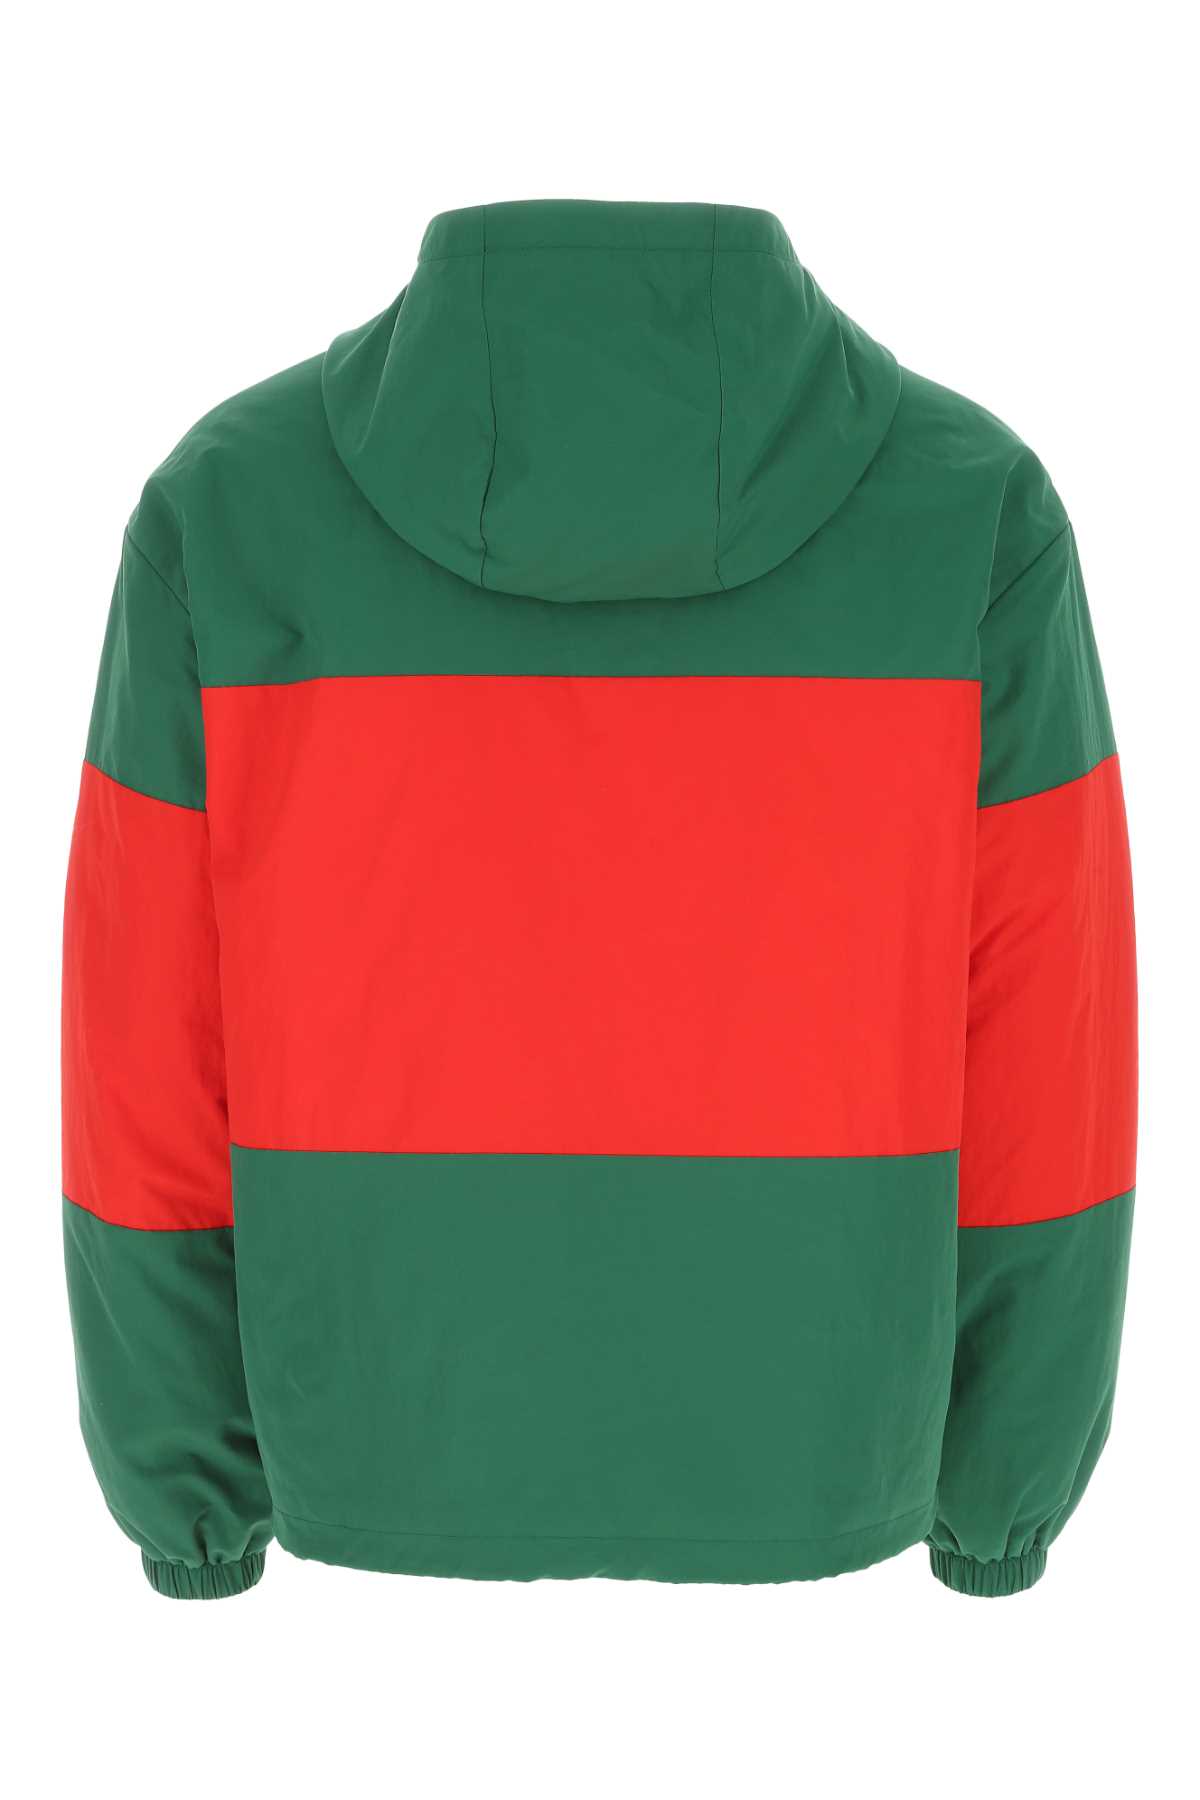 Gucci Two-tone Nylon Oversize Jacket In Green